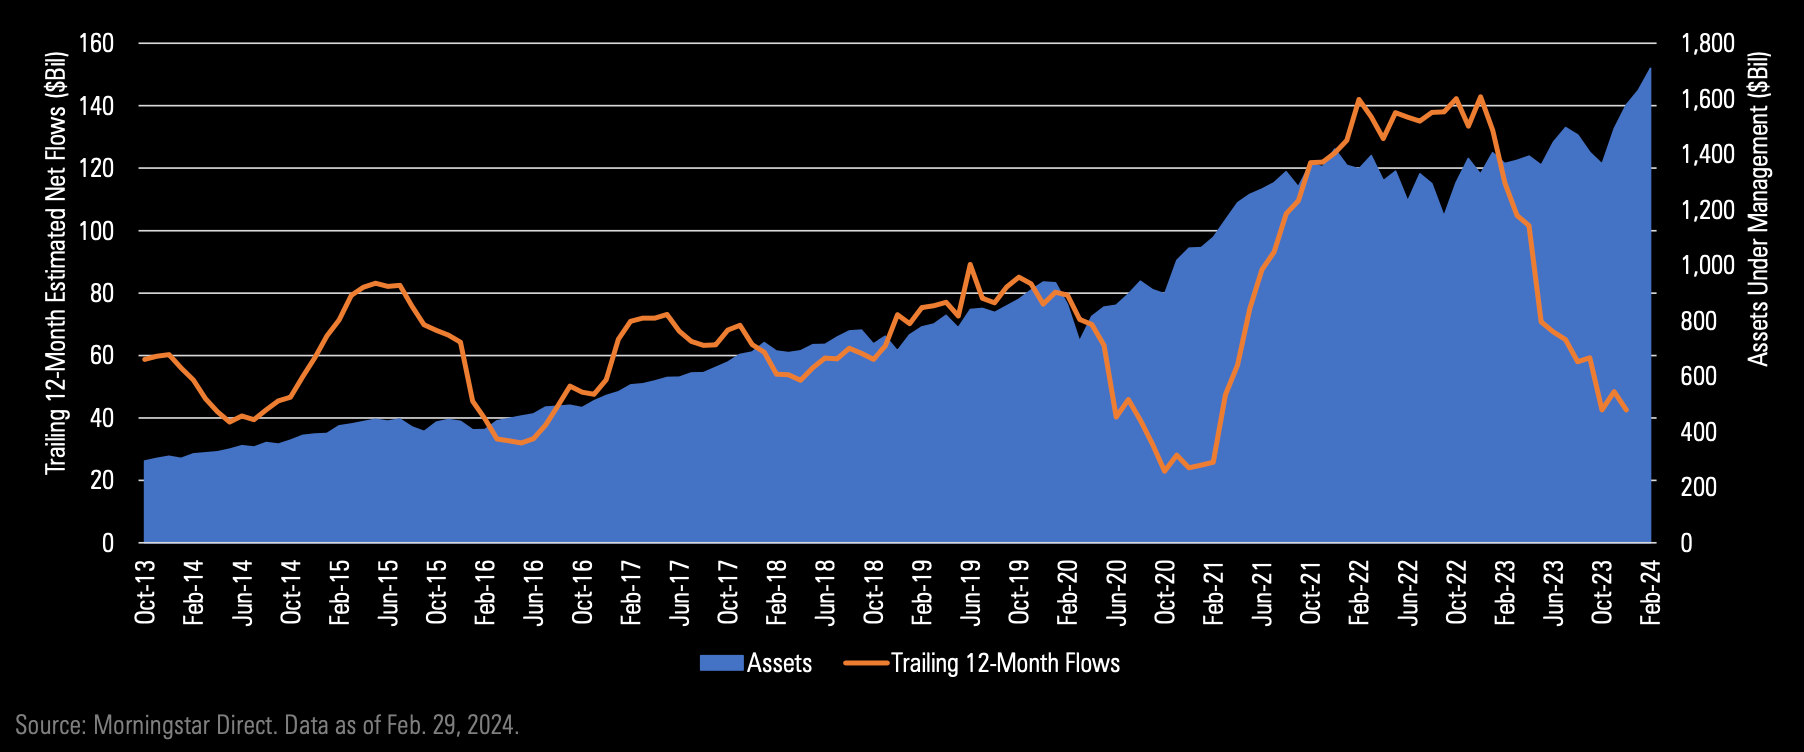 Line graph showing ETFs assets and trailing 12-month flows from October 2013 to February 2024.